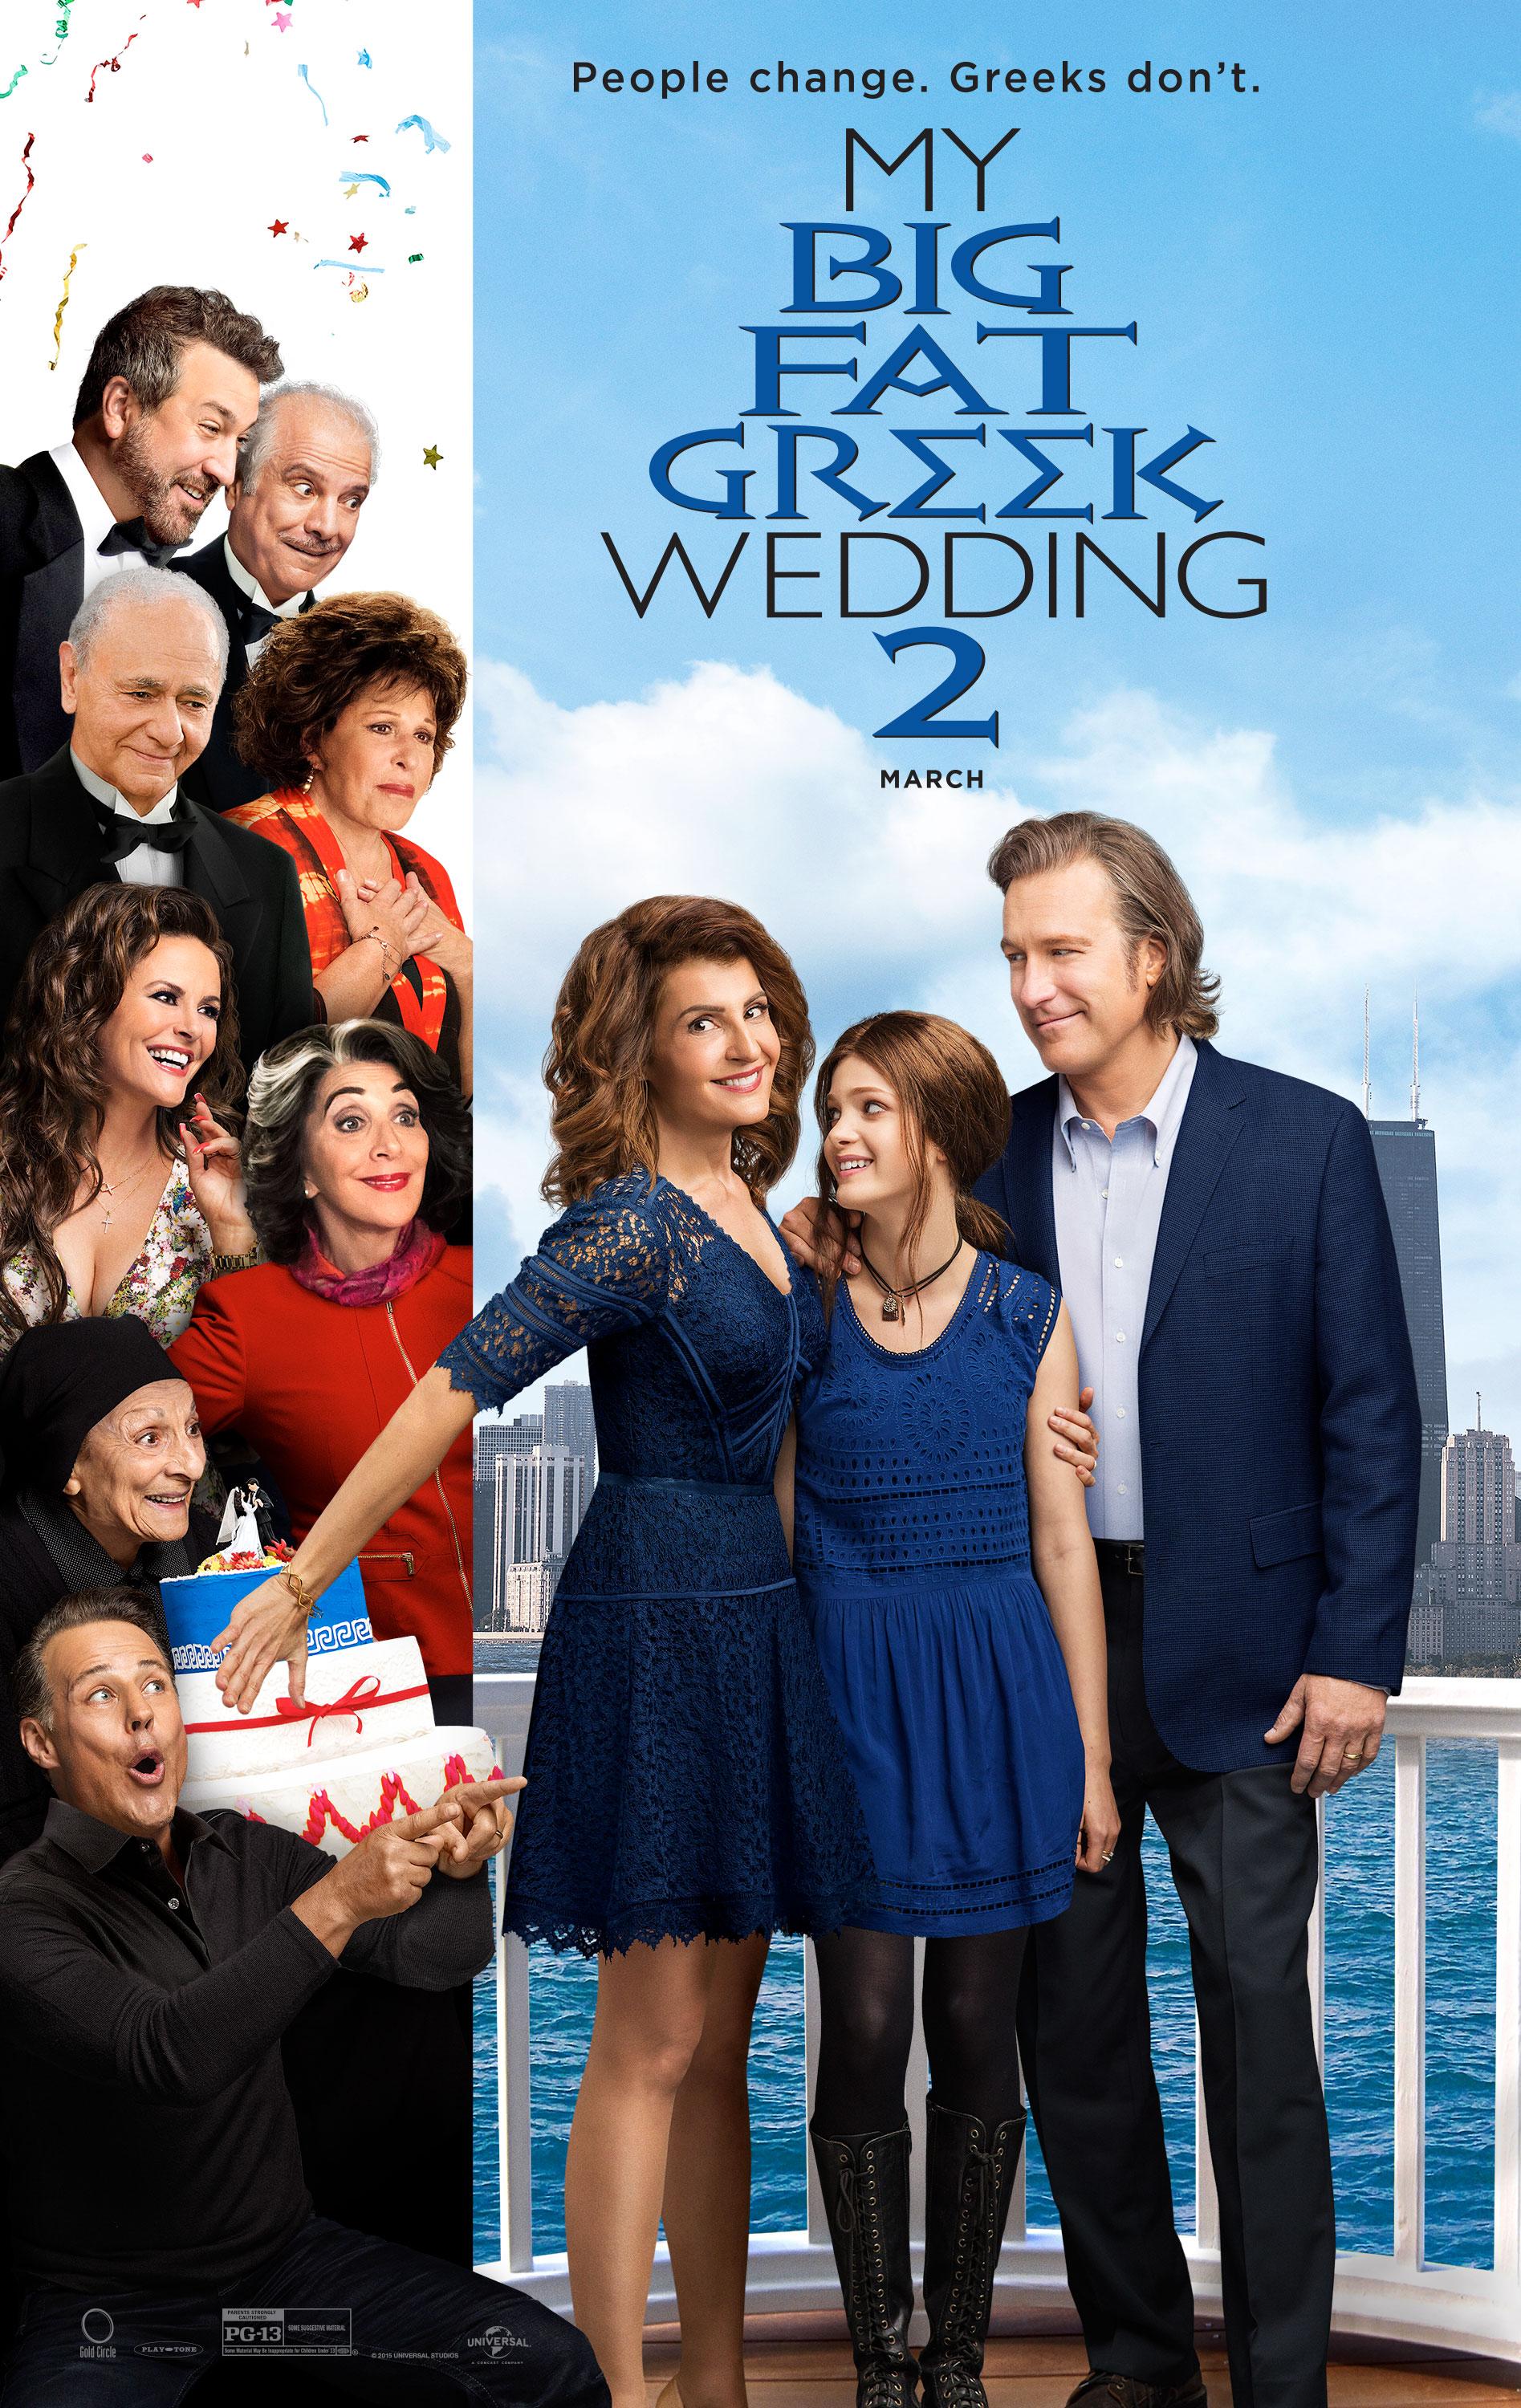 My Big Fat Greek Wedding 2 Poster. In Theaters Now